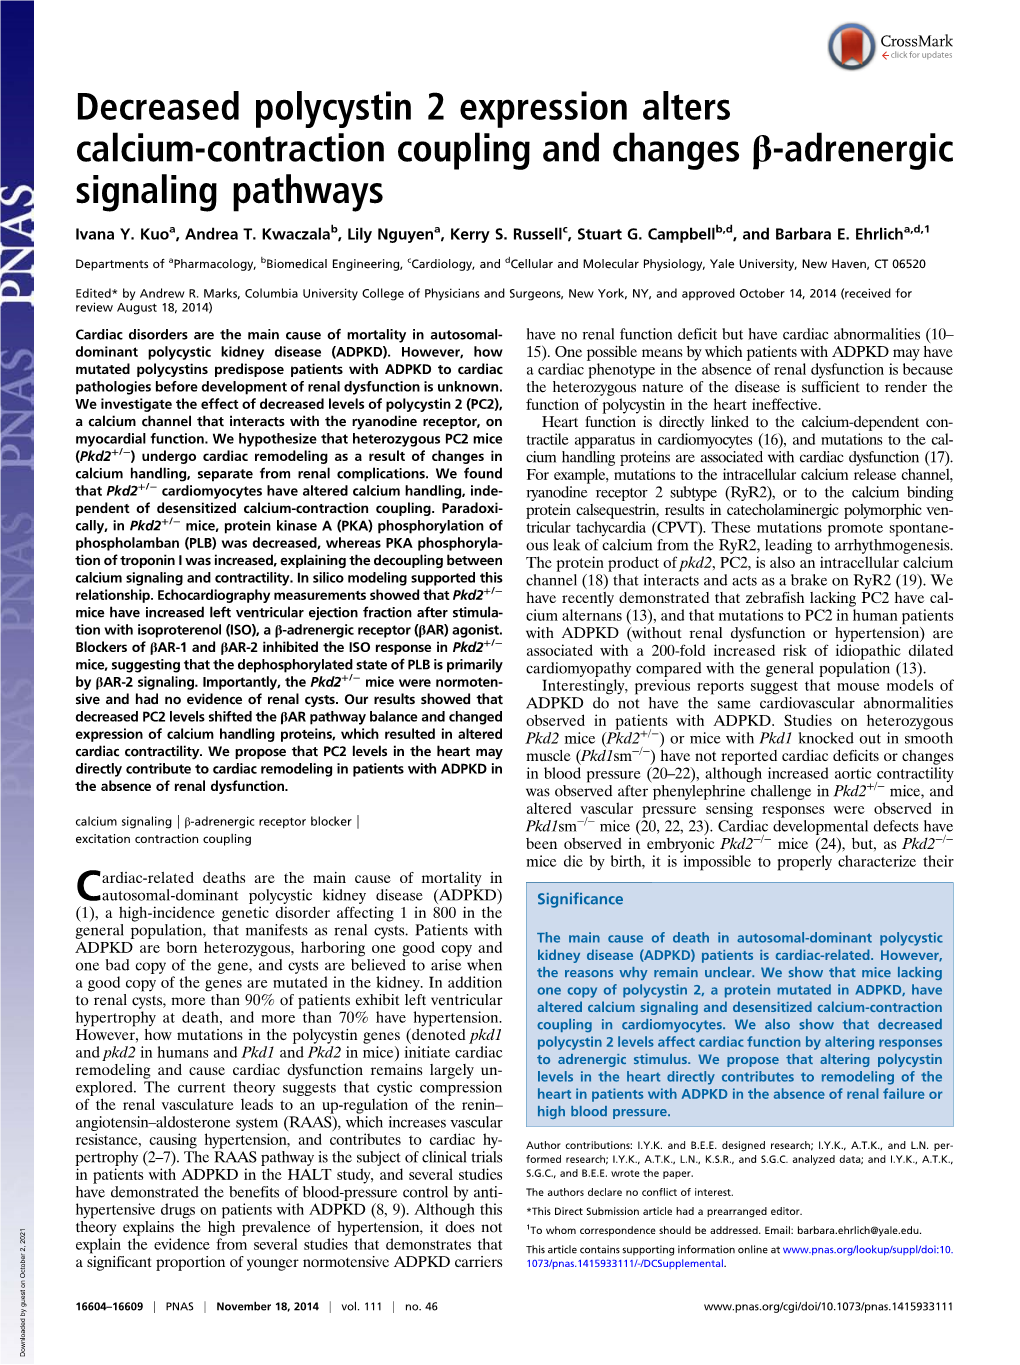 Decreased Polycystin 2 Expression Alters Calcium-Contraction Coupling and Changes Β-Adrenergic Signaling Pathways